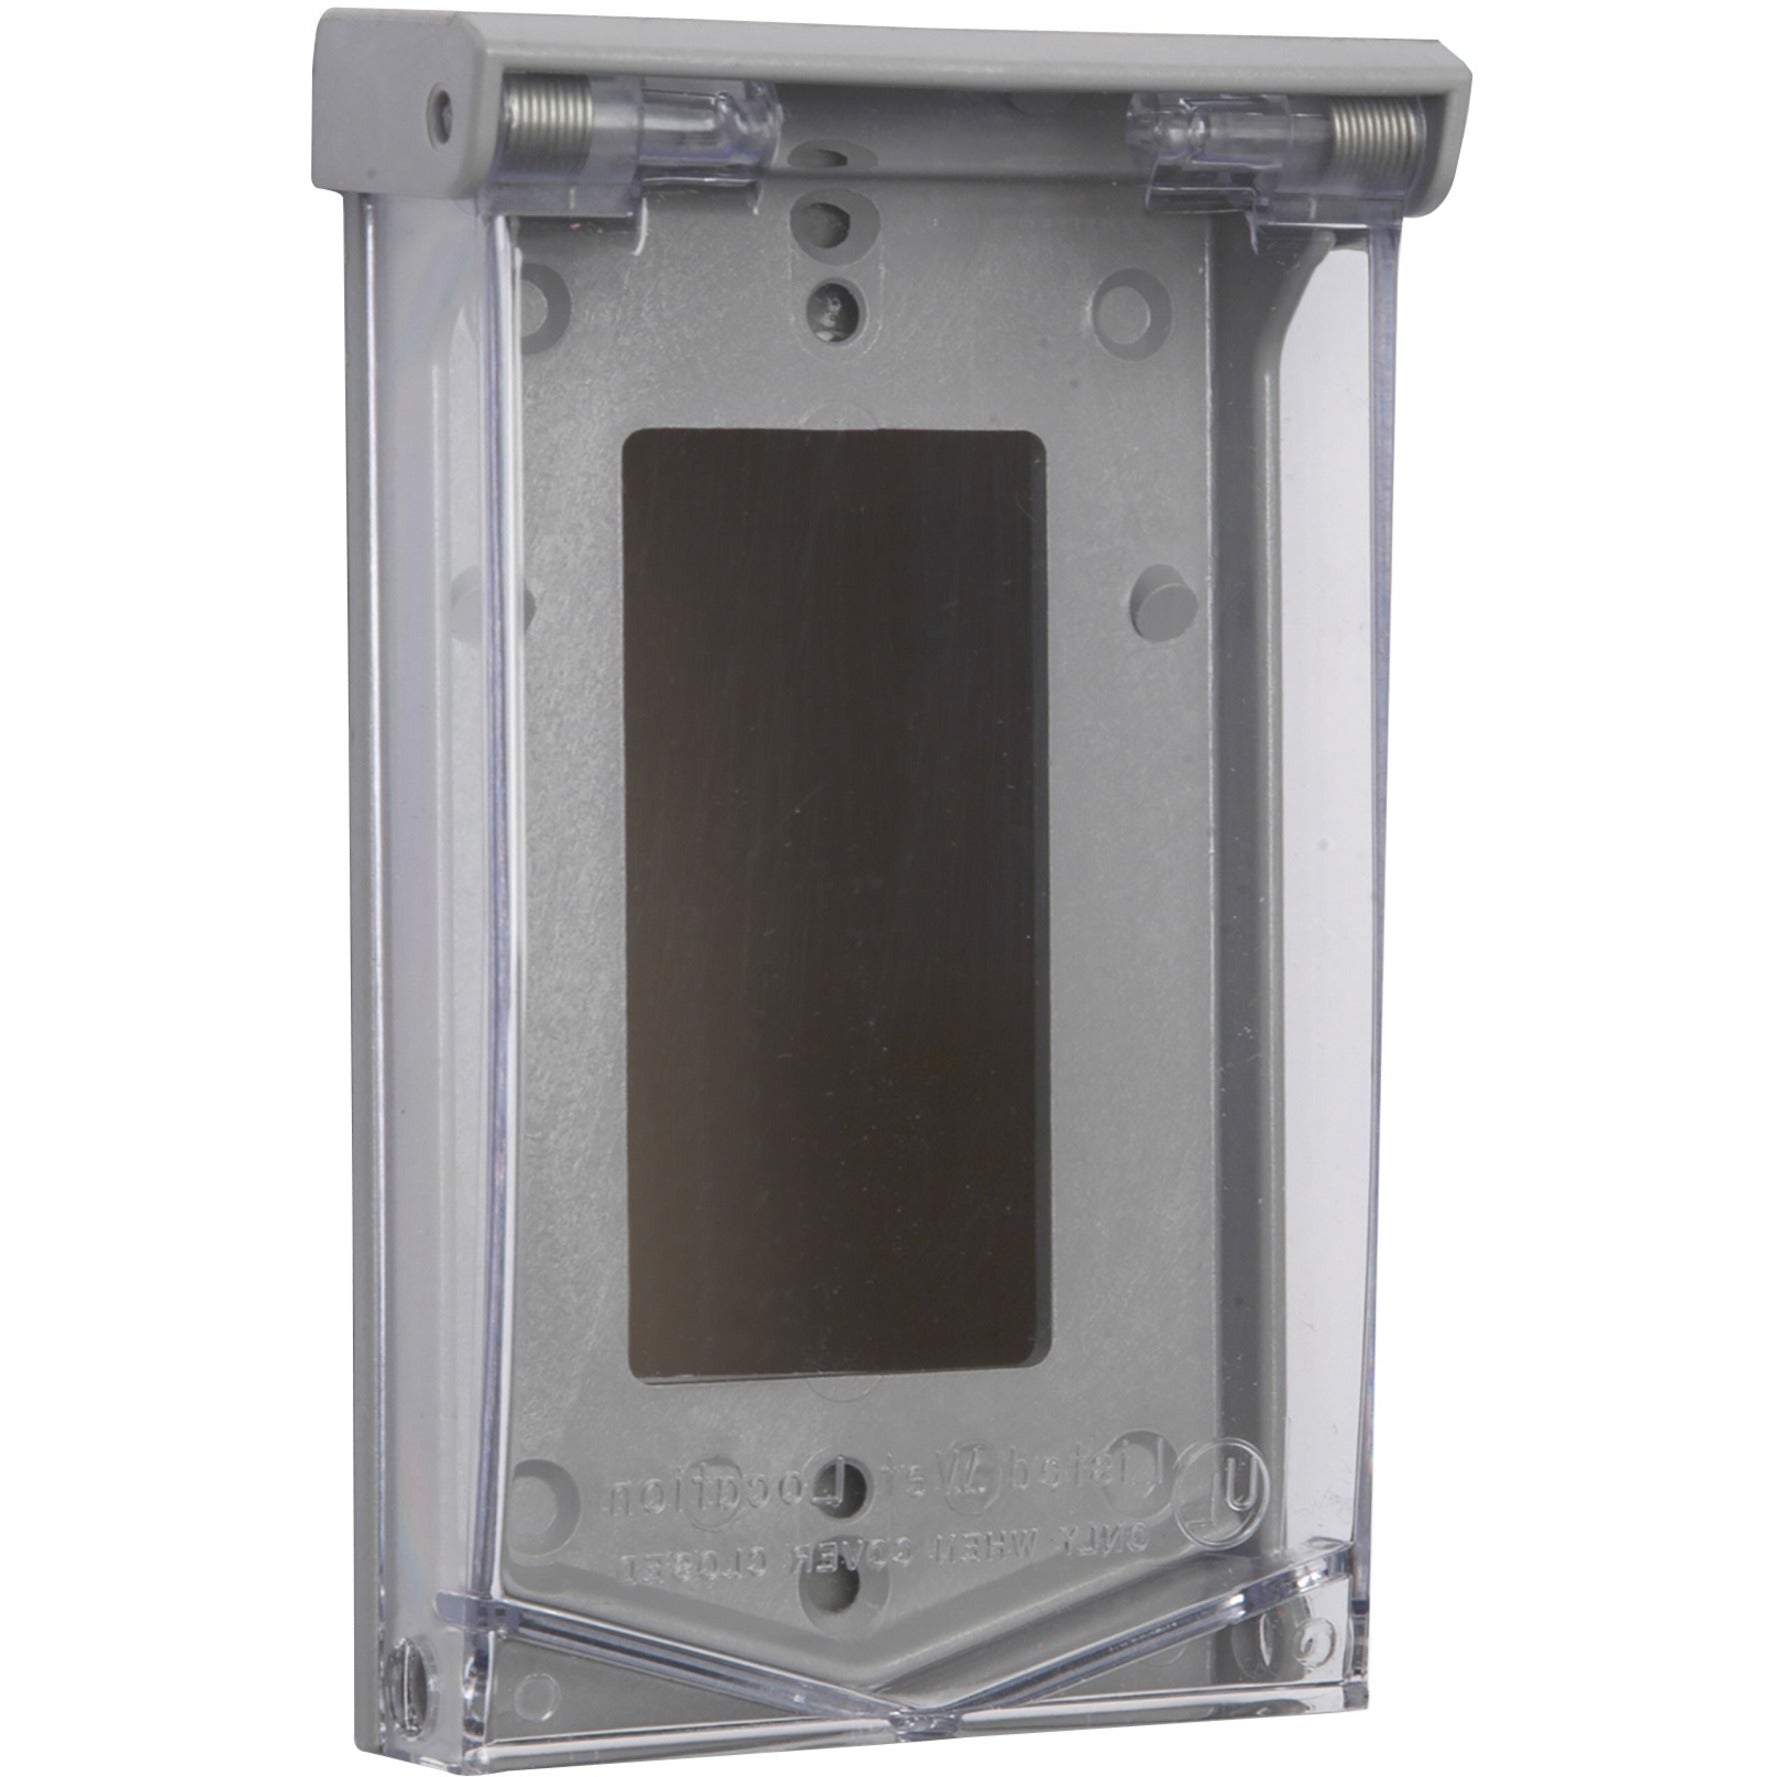 Russound WPB 37-23 Vertical Self-closing Cover, Protective Cover for Single Gang Box